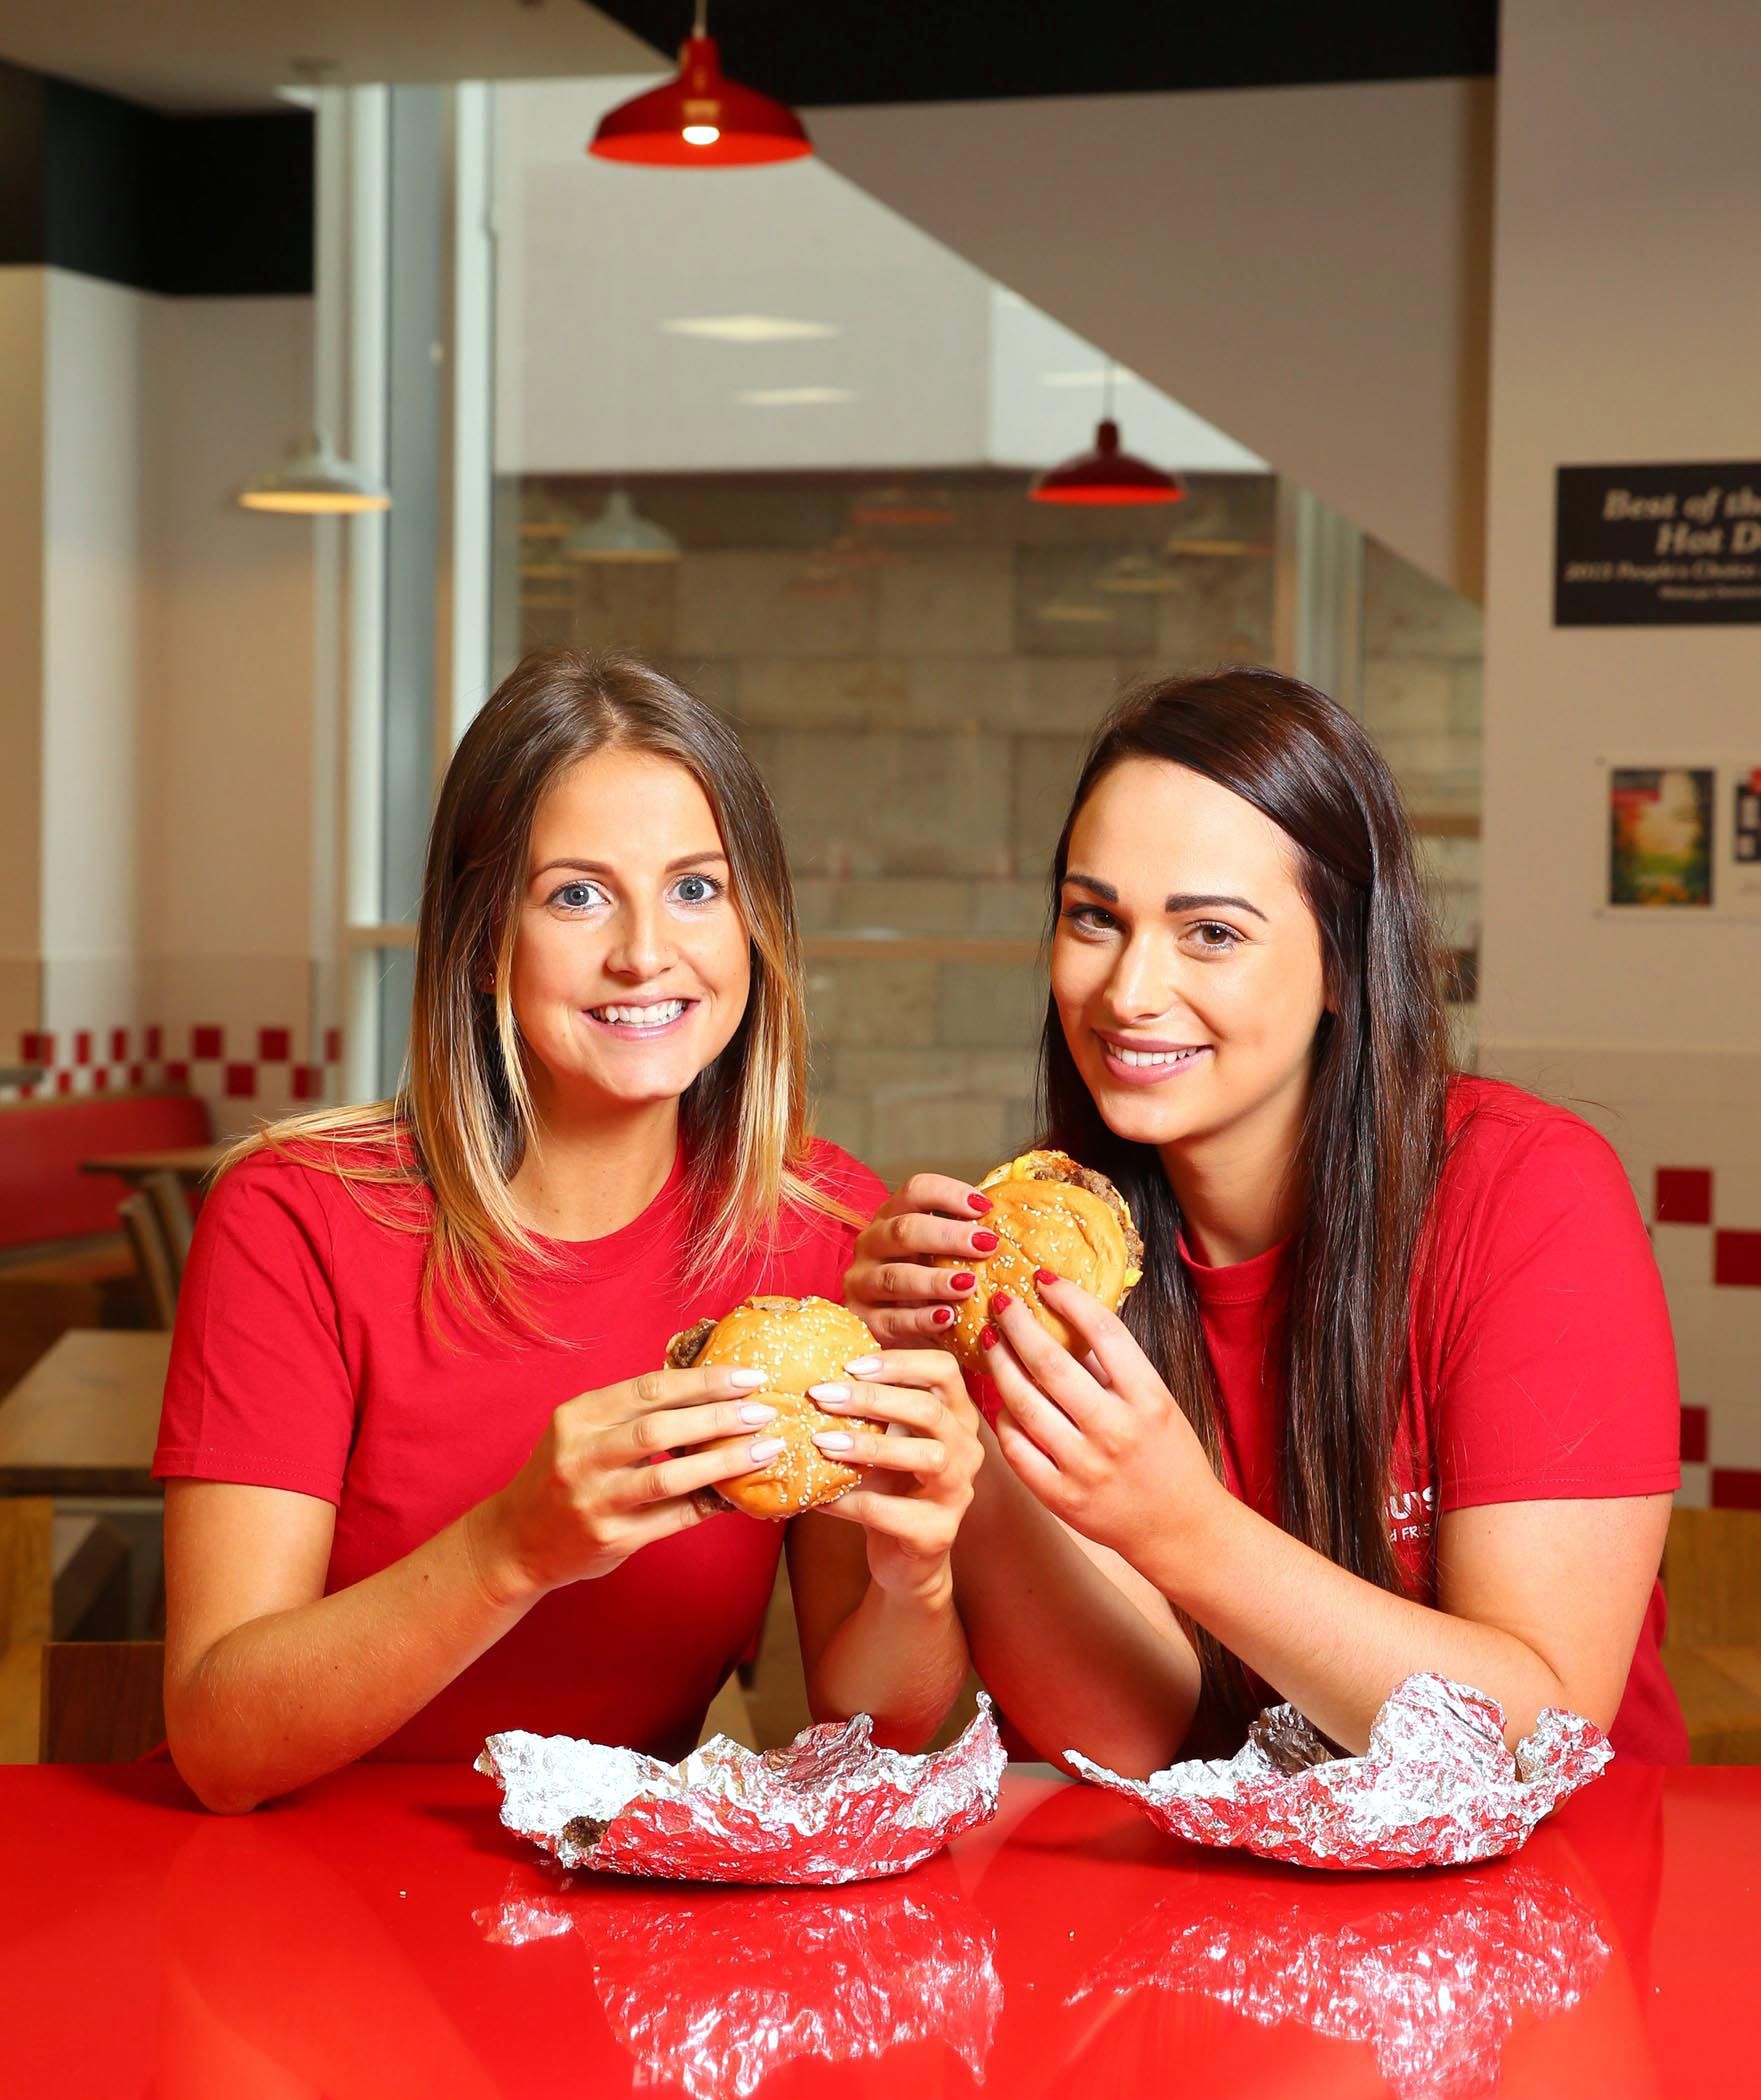 3/10/16 ***NO REPRO FEE*** Five Guys Burgers and Fries open in Dundrum Shopping Centre Laura Smith and Laura Purcell pictured as Five Guys Burgers and Fries, the leader of the Fast Casual Burger market in the US, opened its first location in the Republic of Ireland in Dublin’s Dundrum Shopping Centre creating over 80 jobs. Five Guys is known for its fresh, made to order burgers with a vast choice of toppings, customisable at no extra charge and fries that are fresh potatoes cooked in 100% peanut oil. Irish customers can expect to receive an authentic Five Guys experience in Dublin, just as they would in the U.S. The Murrell family and their team have ensured that every Five Guys restaurant, from the food to the layout, is consistent around the world. Pic: Marc O'Sullivan For Press enquiries & Imagery please contact Joanne Rochford | Invoke PR & Events| Email: joanne@invoke.ie Tel: 00 3531-678 8878 | M: 00 353 86 3537496